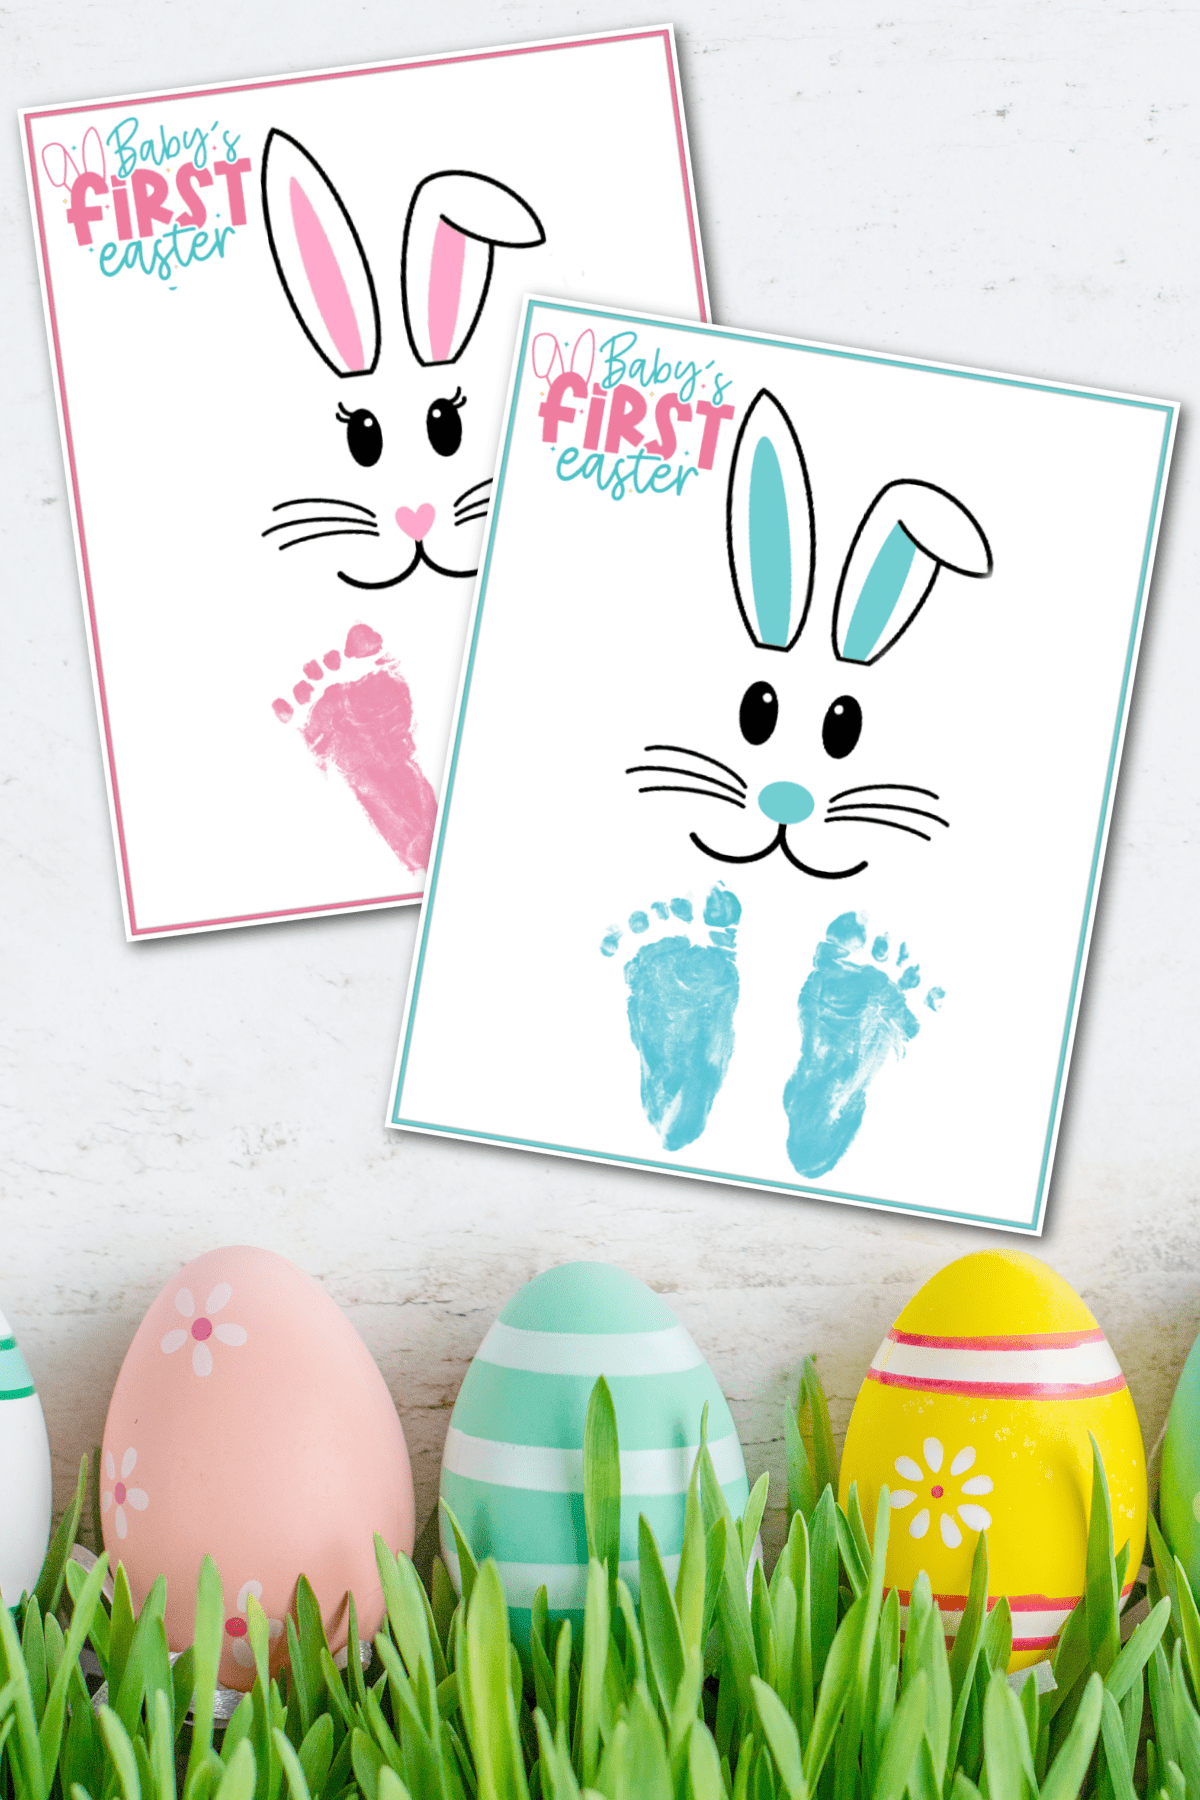 Baby's First Easter Footprints printables with Easter eggs